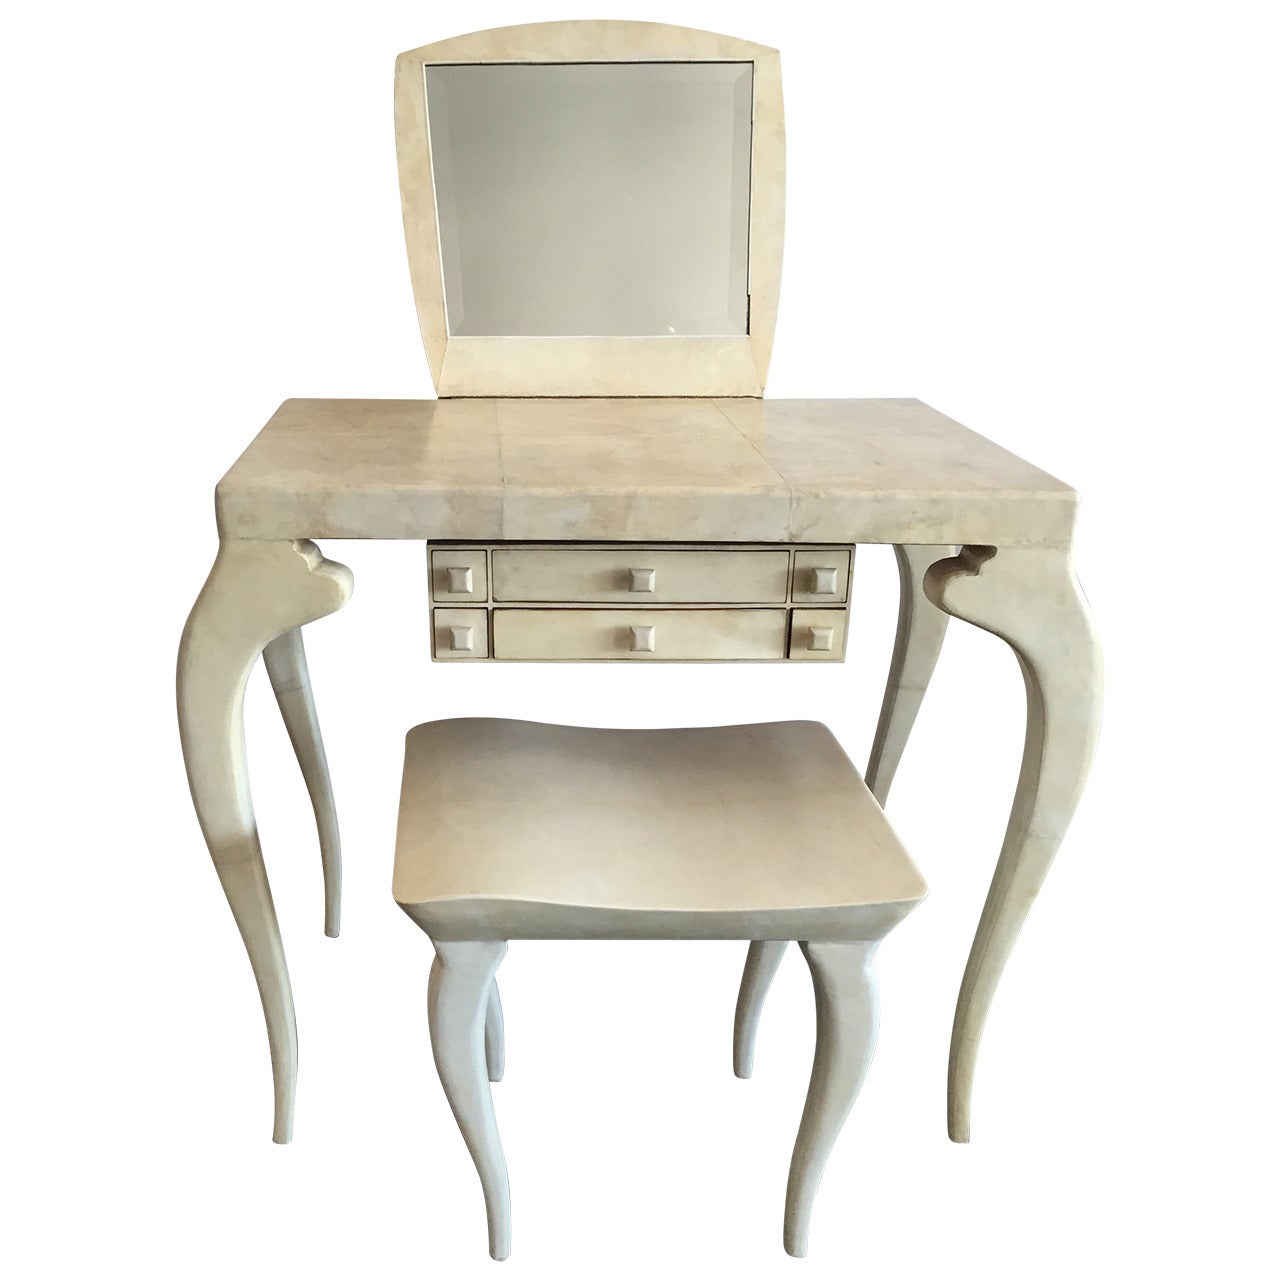 R & Y Augousti Parchment Vanity with Matching Stool